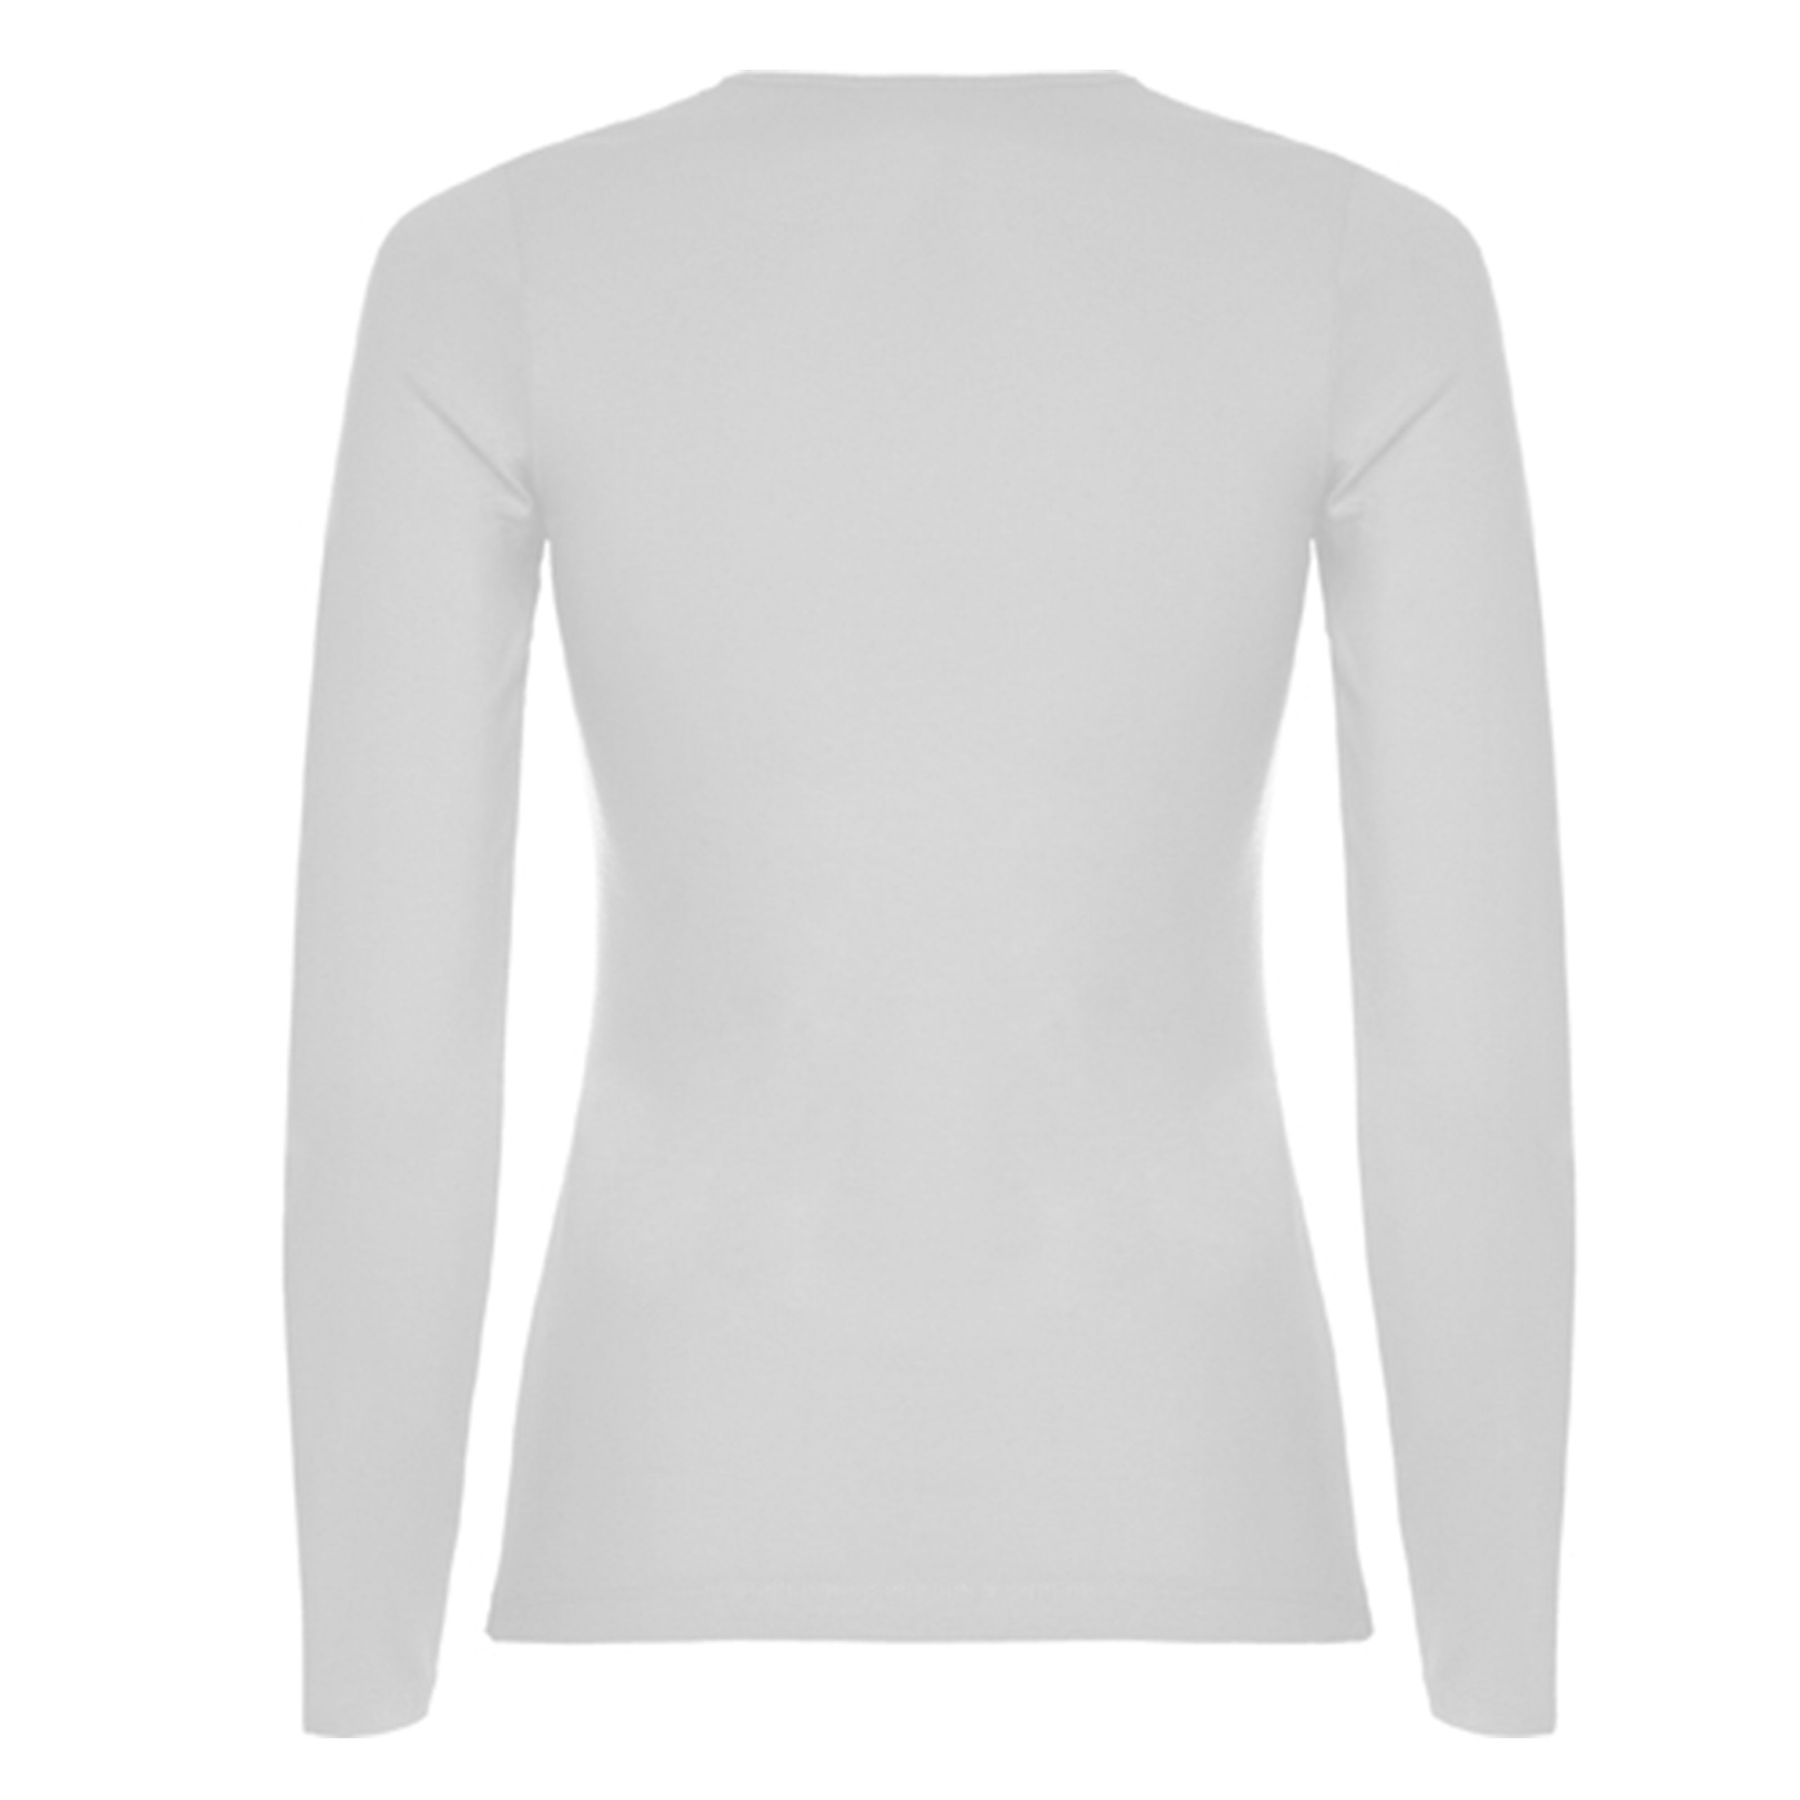 Extreme Woman long sleeve t-shirt with your LOGO